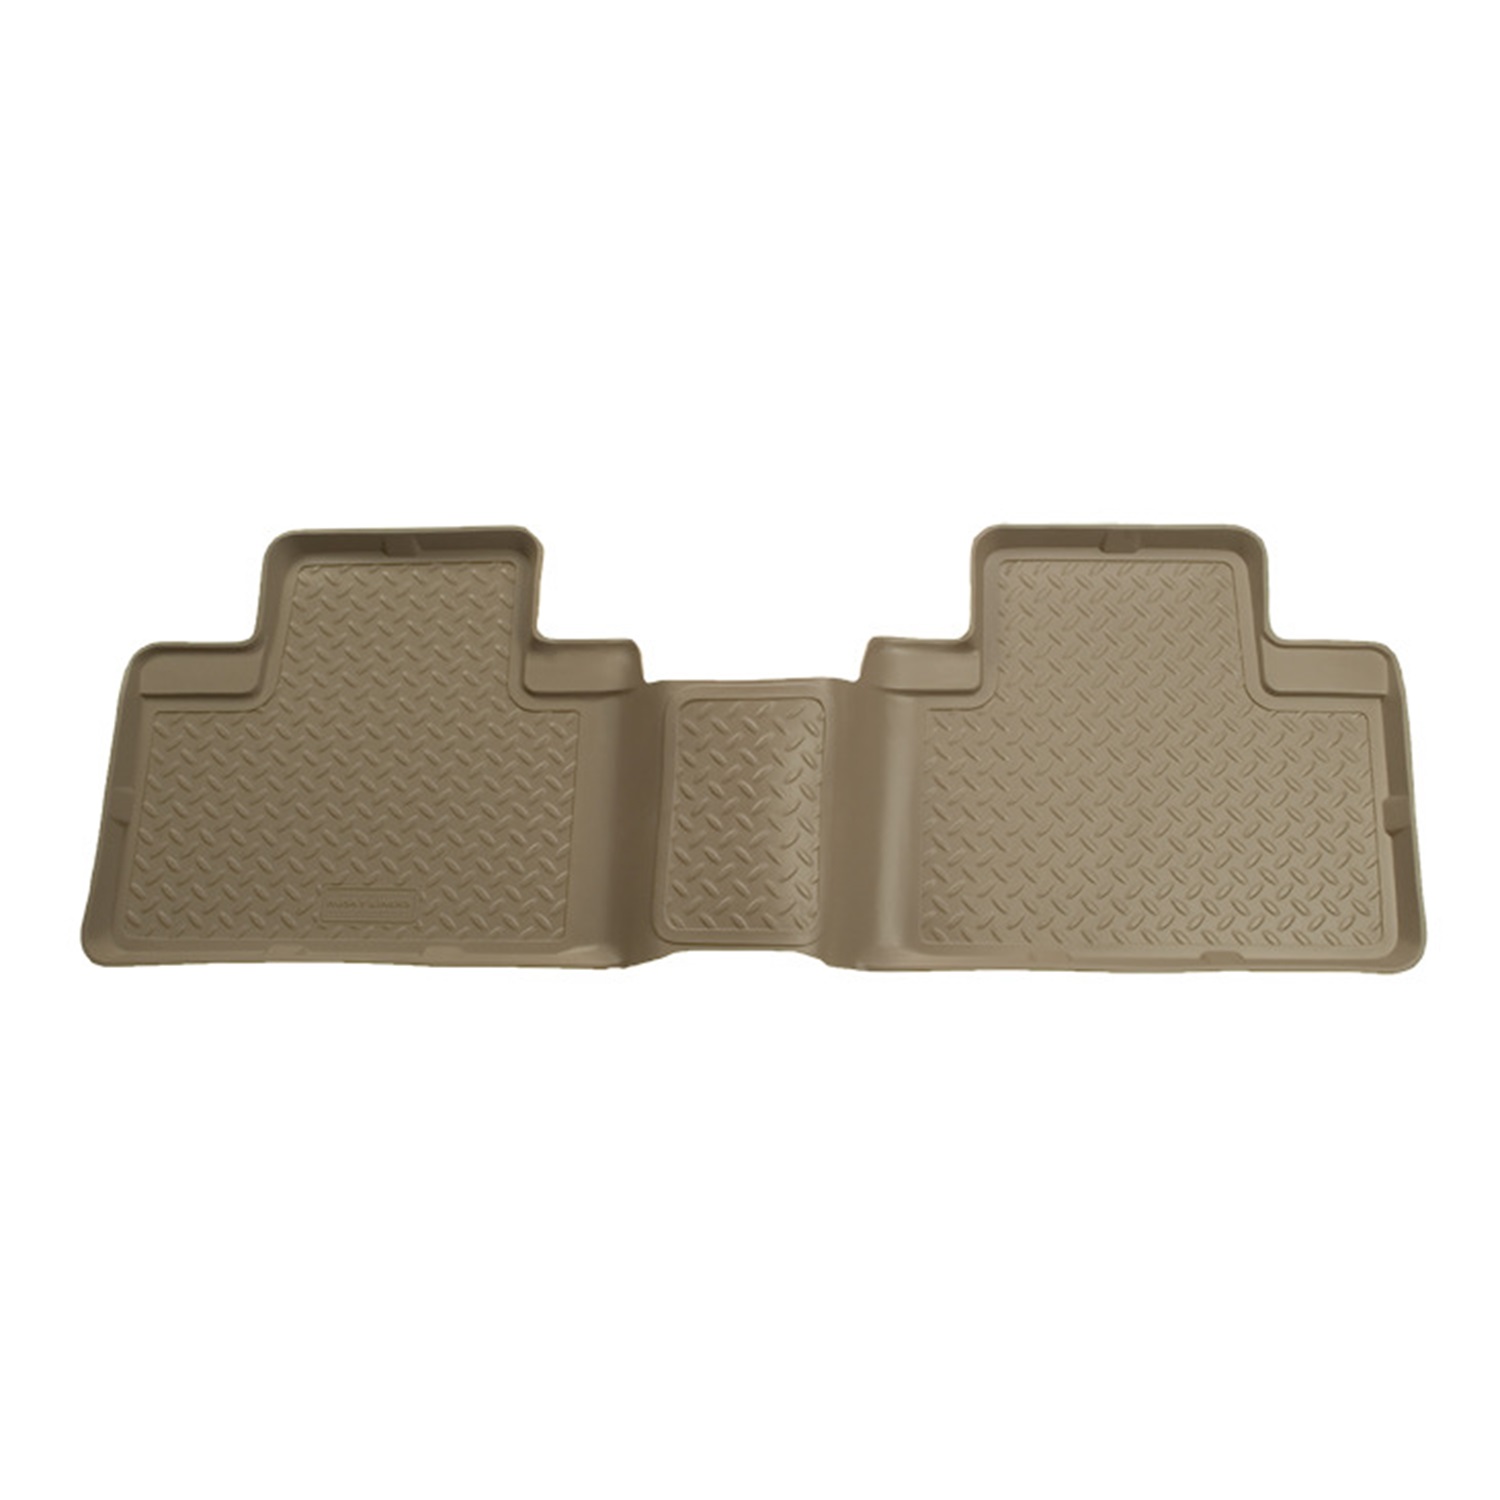 Husky Liners Husky Liners 60153 Classic Style; Floor Liner Fits 07-15 Caliber Compass Patriot